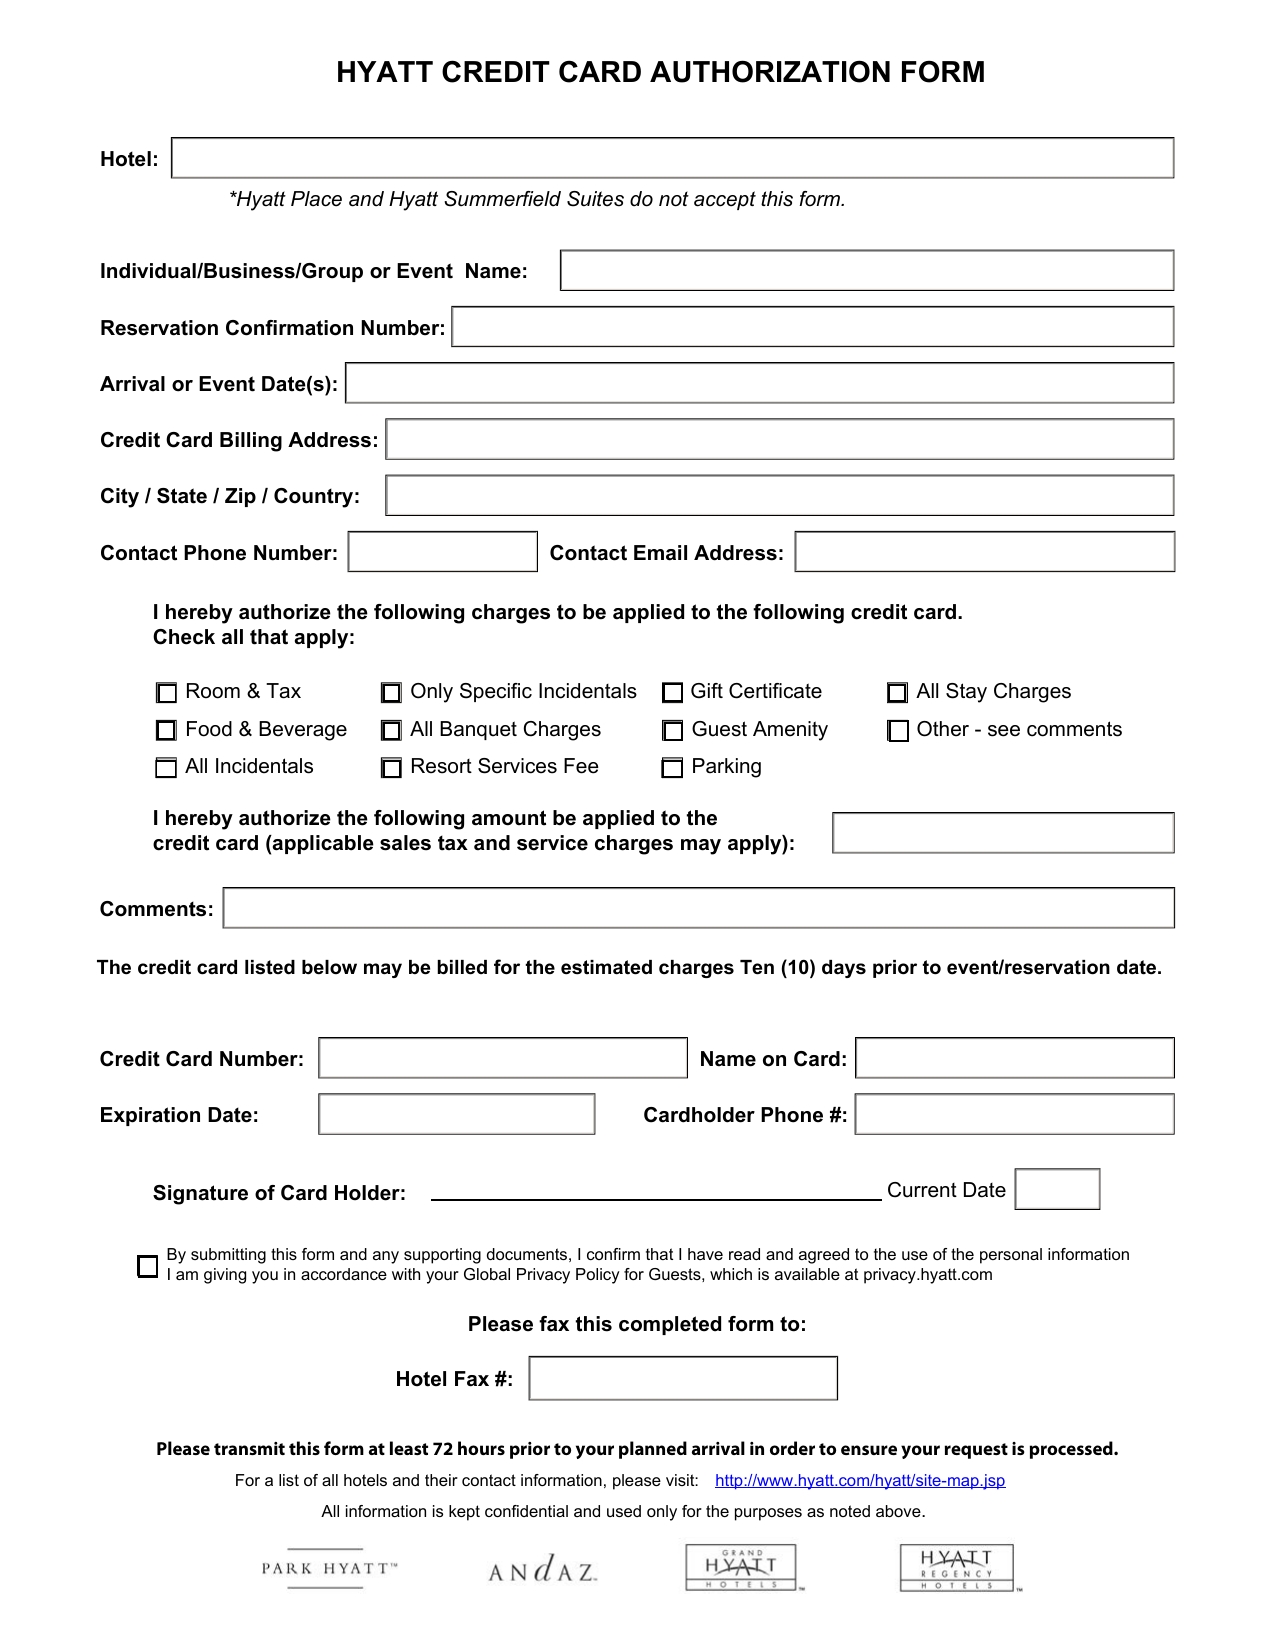 Download Hyatt Credit Card Authorization Form Template | Pdf inside Hotel Credit Card Authorization Form Template